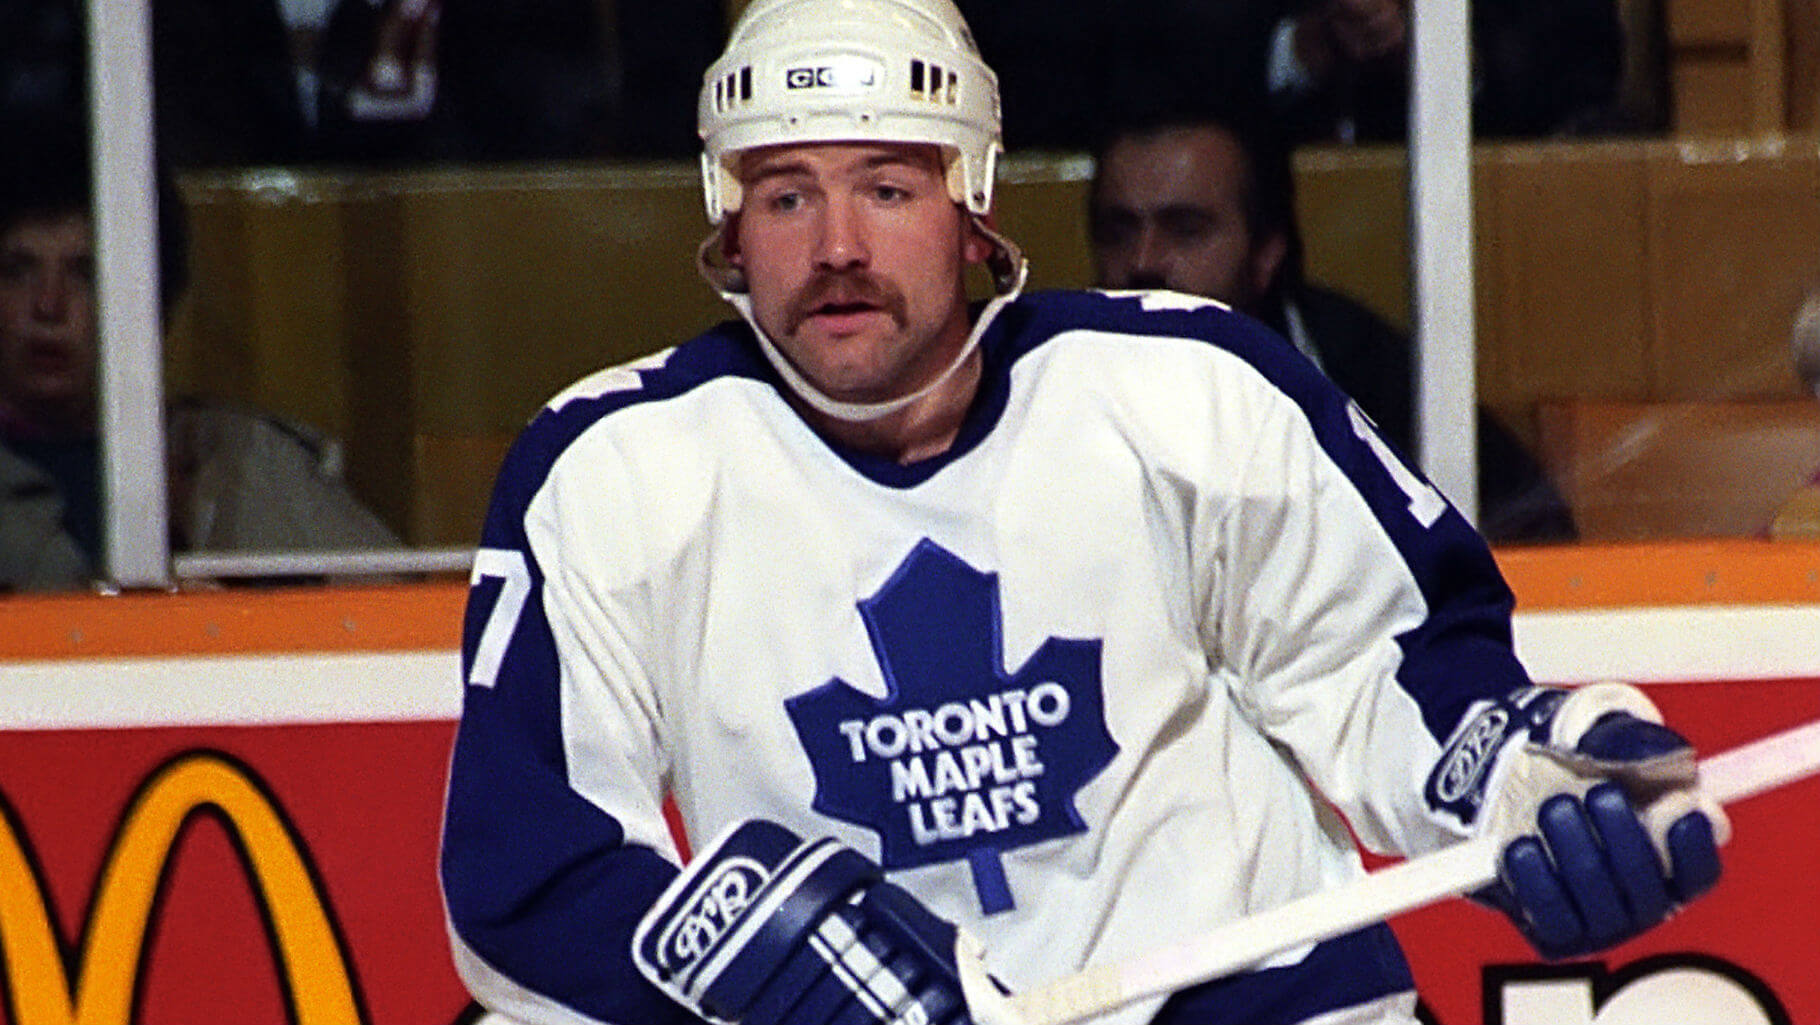 Toronto Maple Leafs forward Wendel Clark,during warmups before the